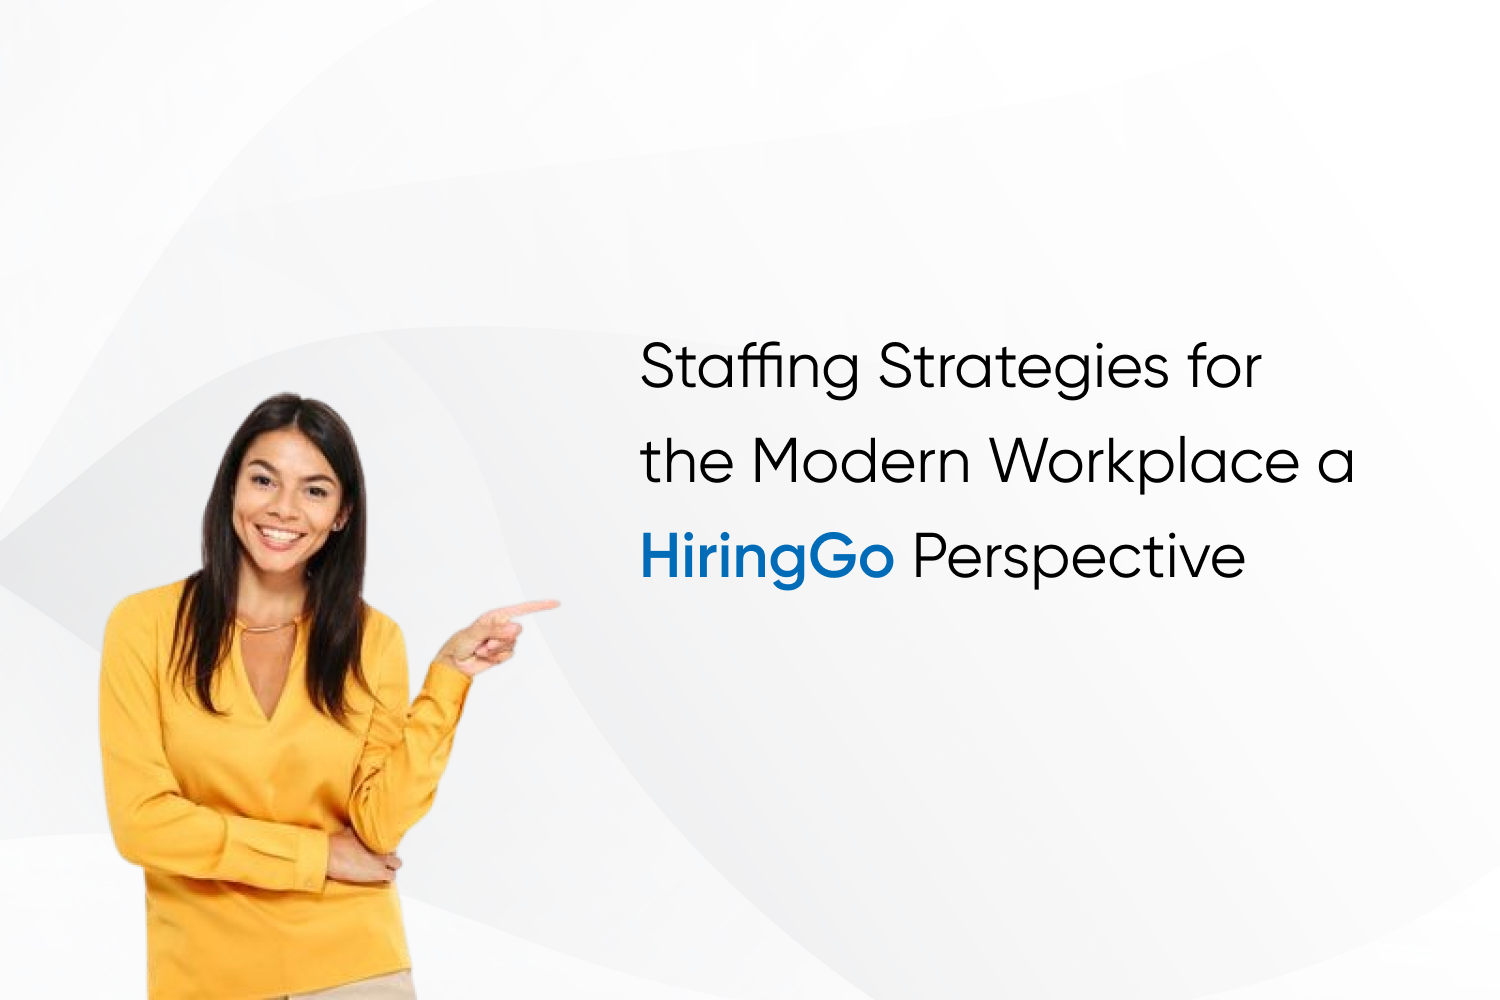 Staffing Strategies for the Modern Workplace A HiringGo Perspective